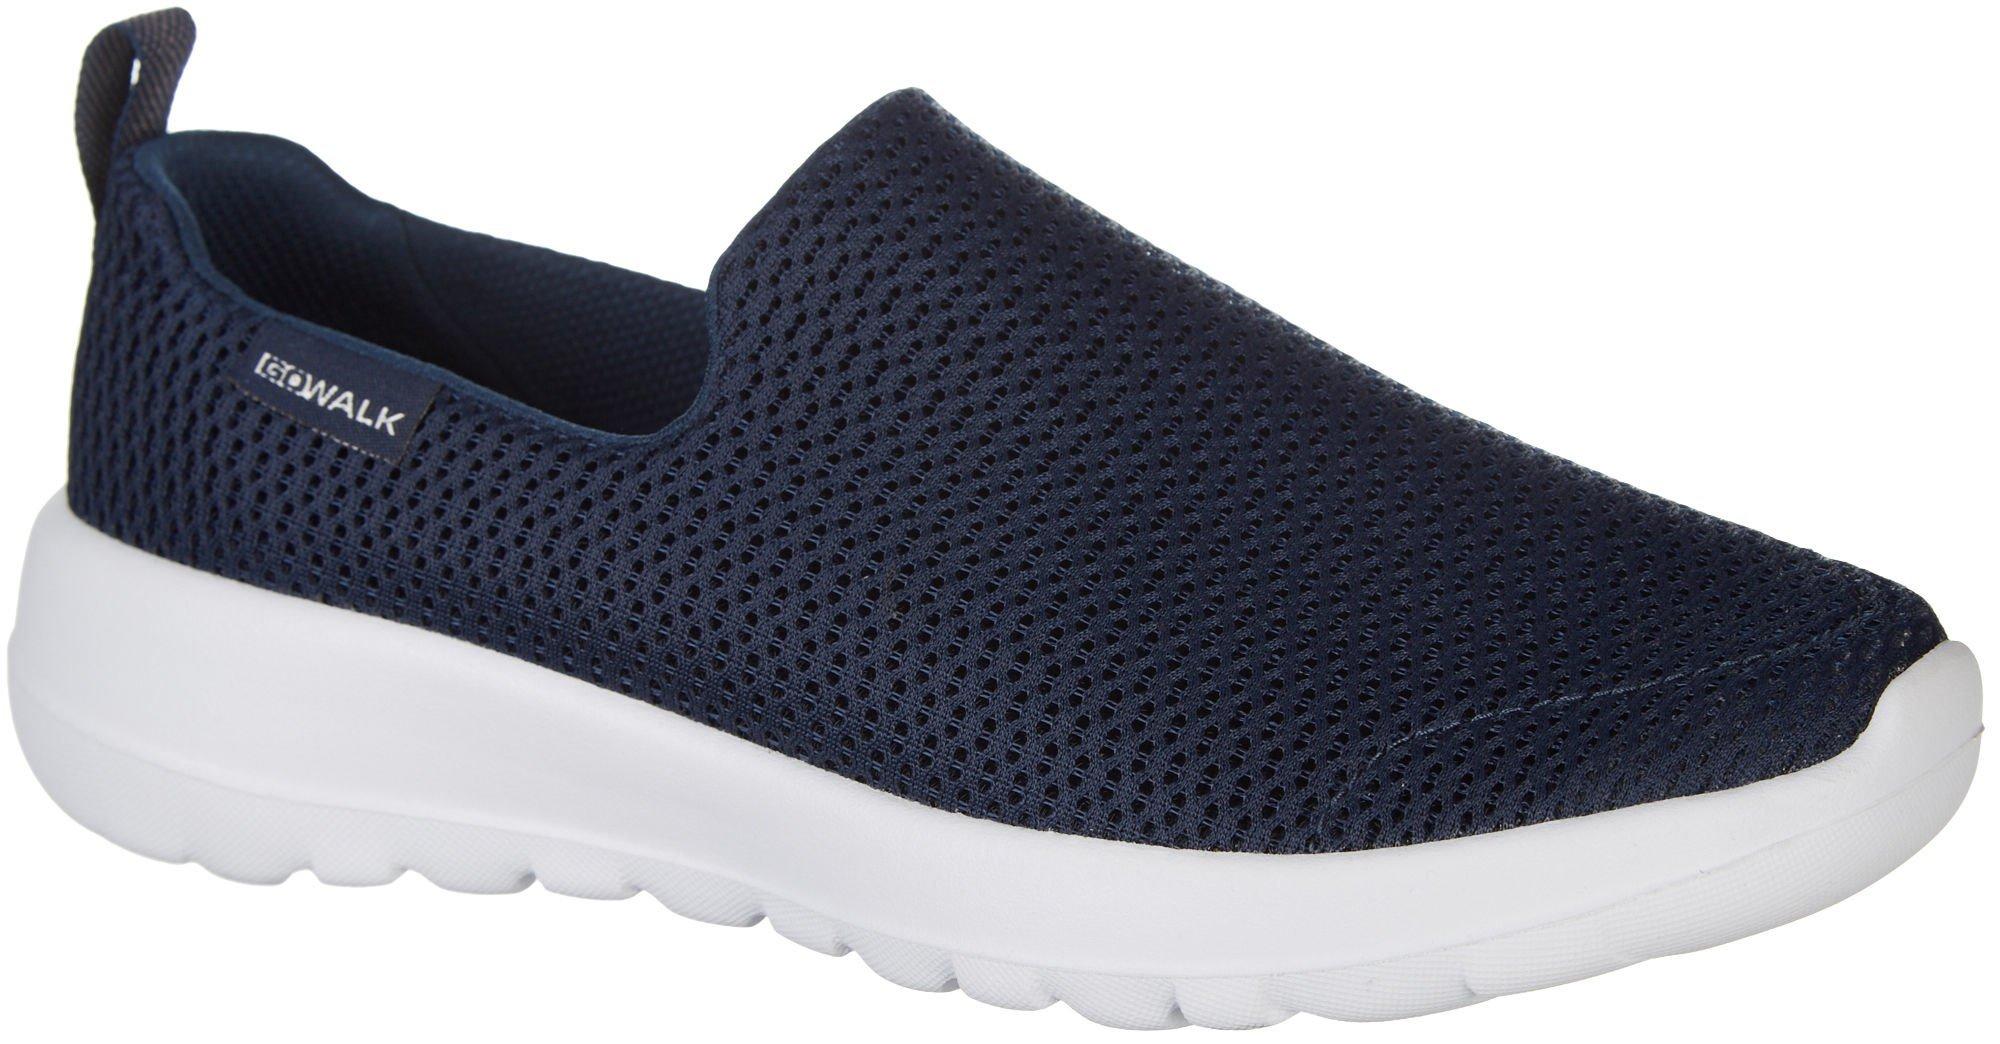 Athletic Shoes and Sandals | Bealls Florida